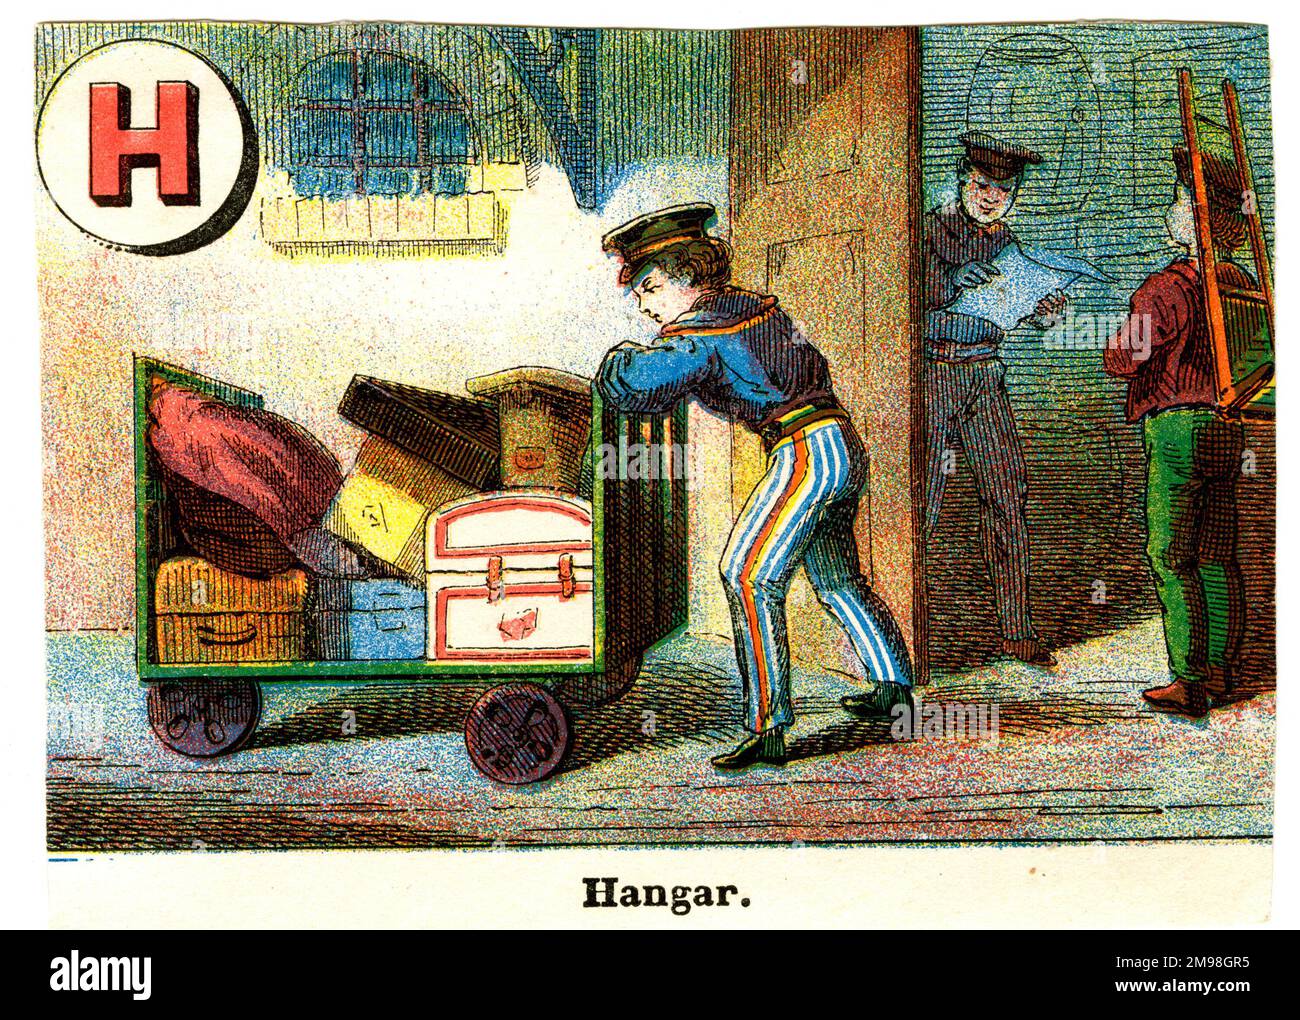 French Railway Alphabet - H for Hangar (storage shed). Stock Photo